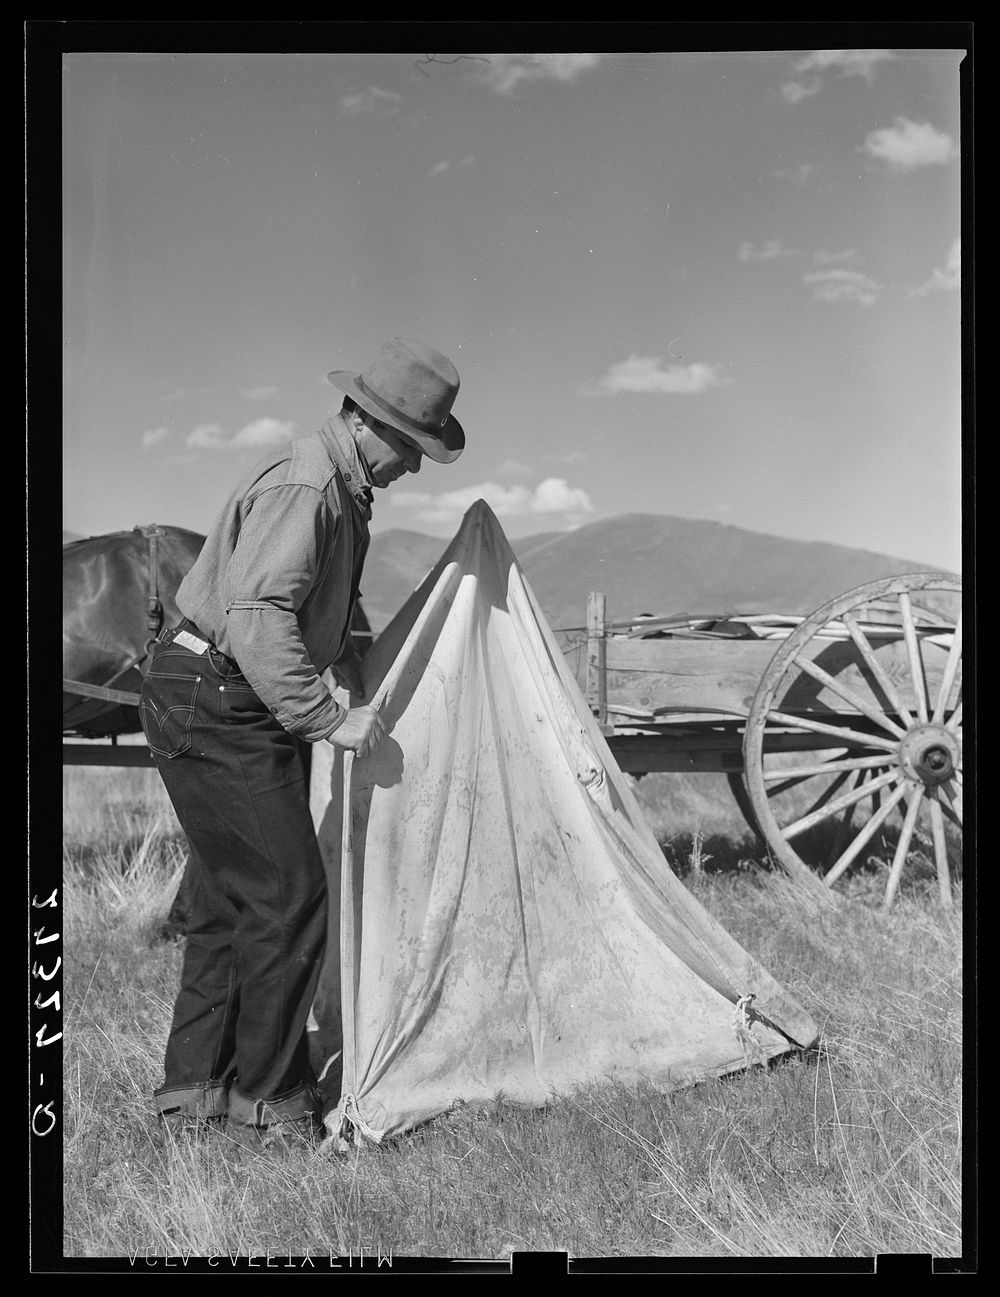 Sheepherder setting up lambing tent. Montana, Madison County. Sourced from the Library of Congress.